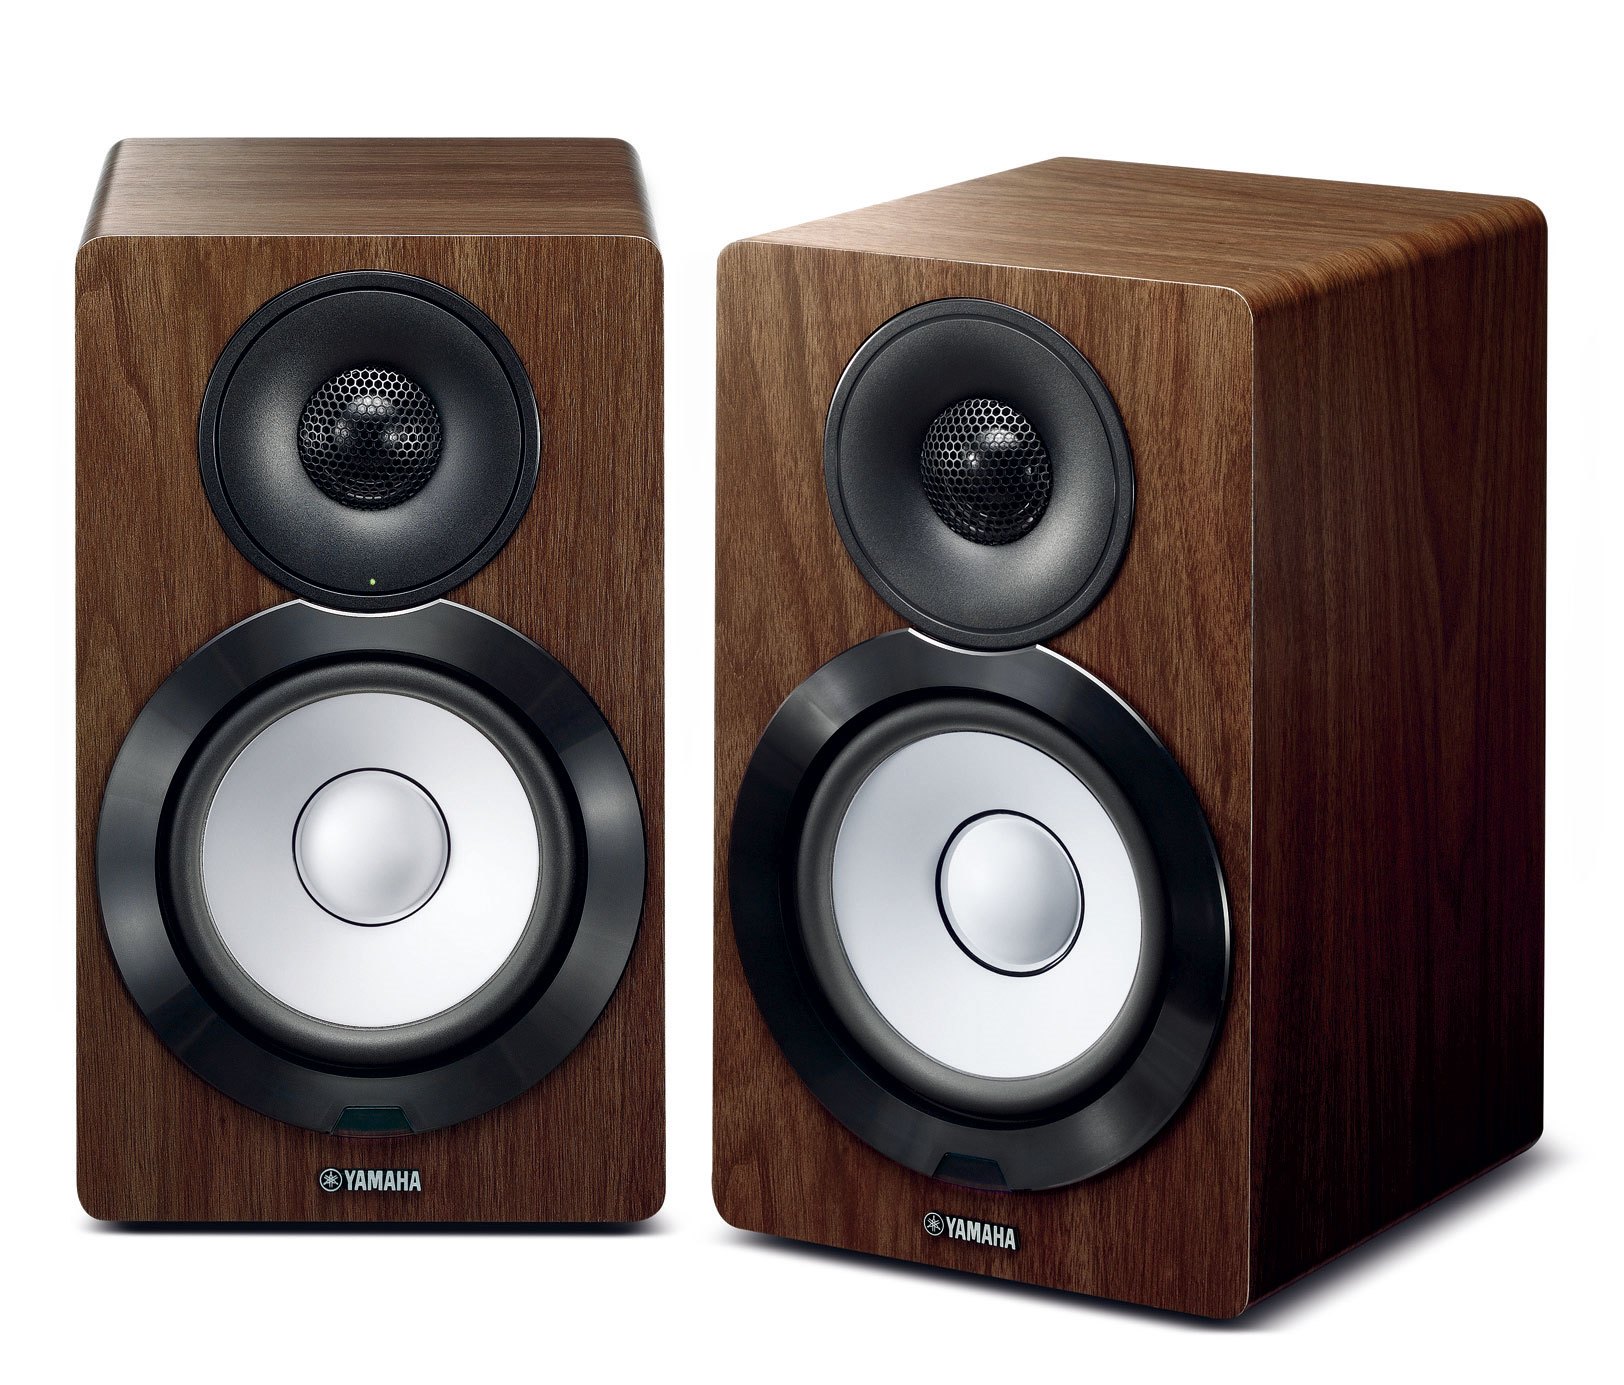 MusicCast NX-N500 - Overview - Speaker Systems - Audio & Visual 